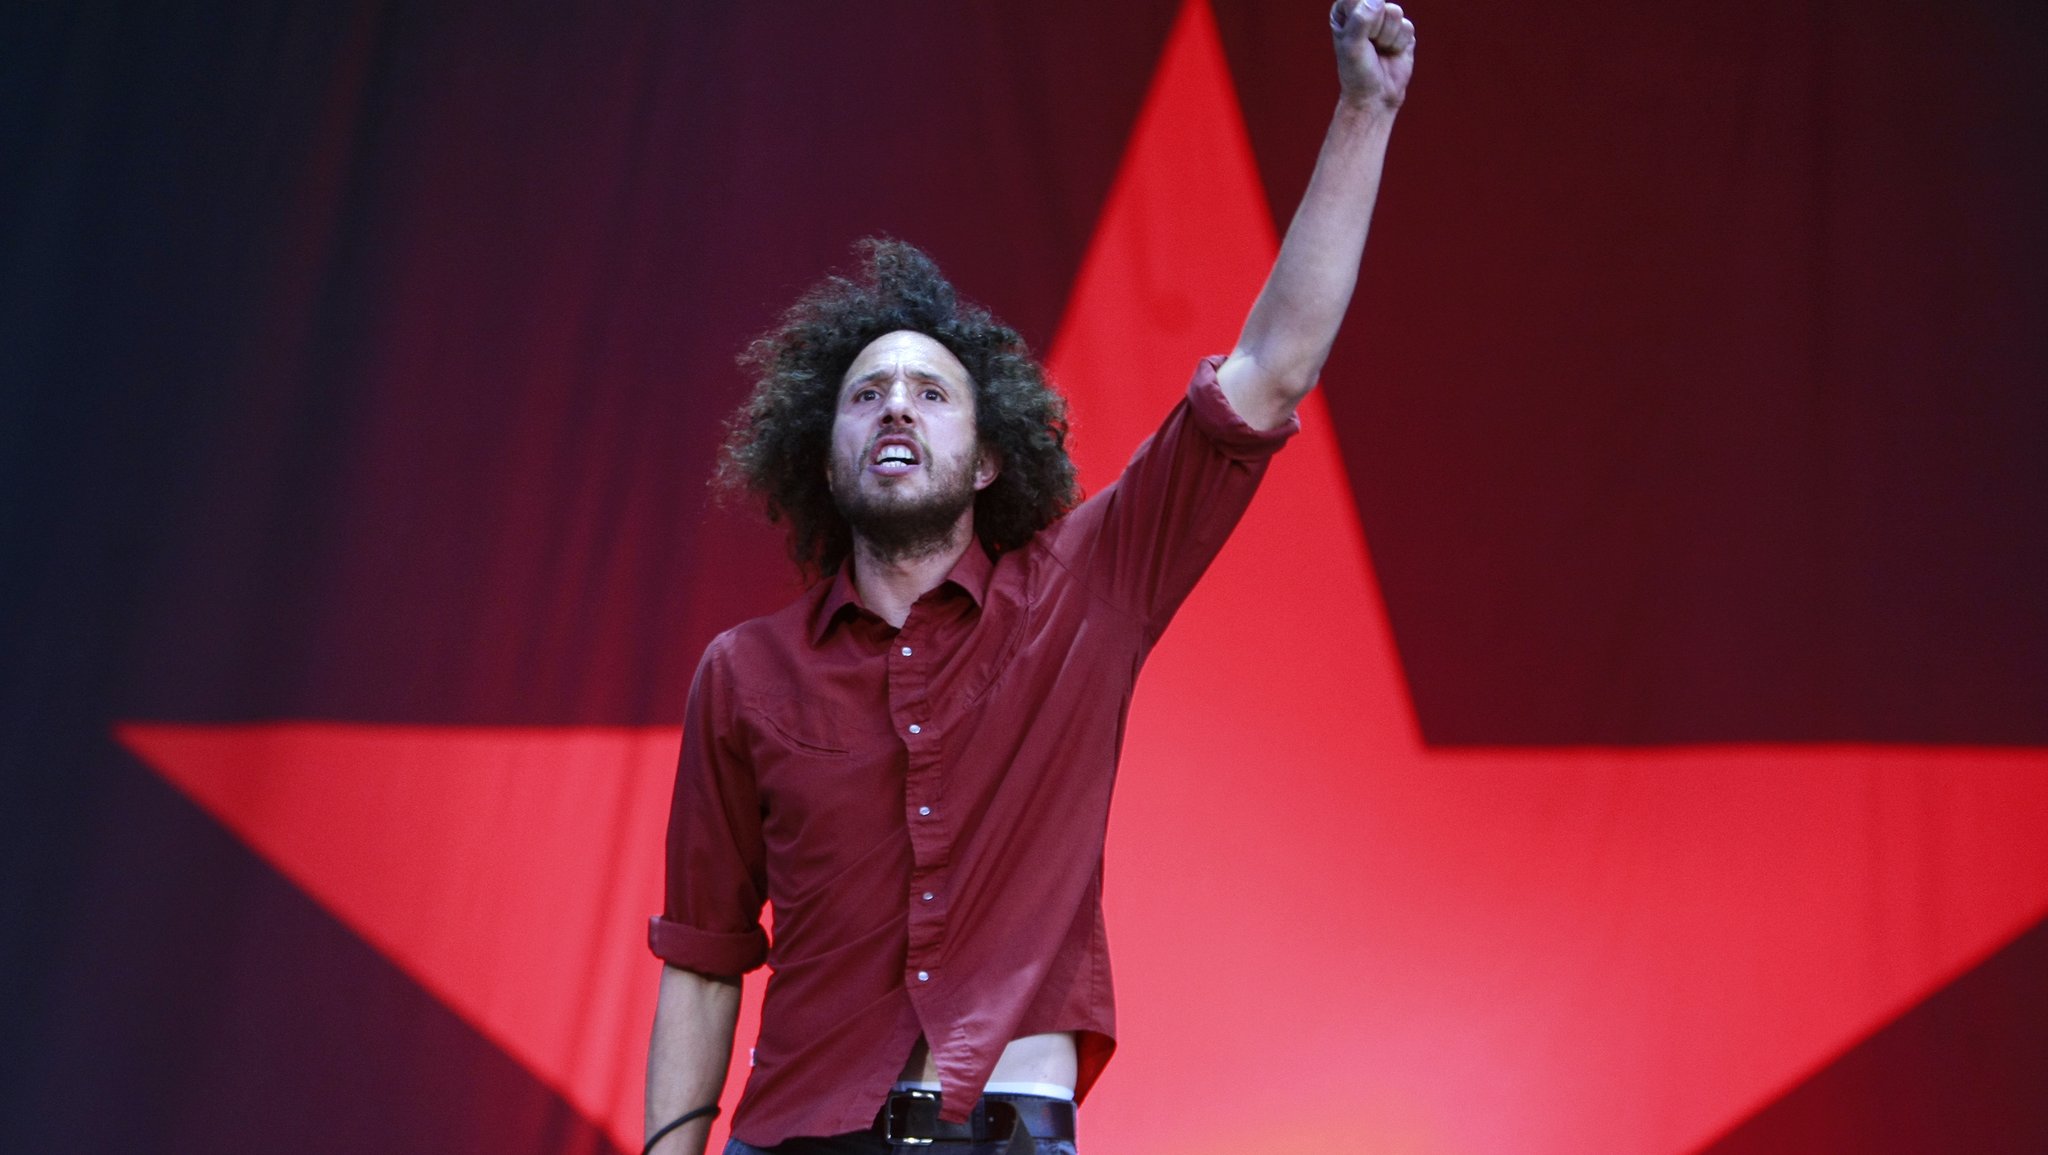 January 12, 1970

Happy birthday to the one and only Zack de la Rocha of Rage Against The Machine. 